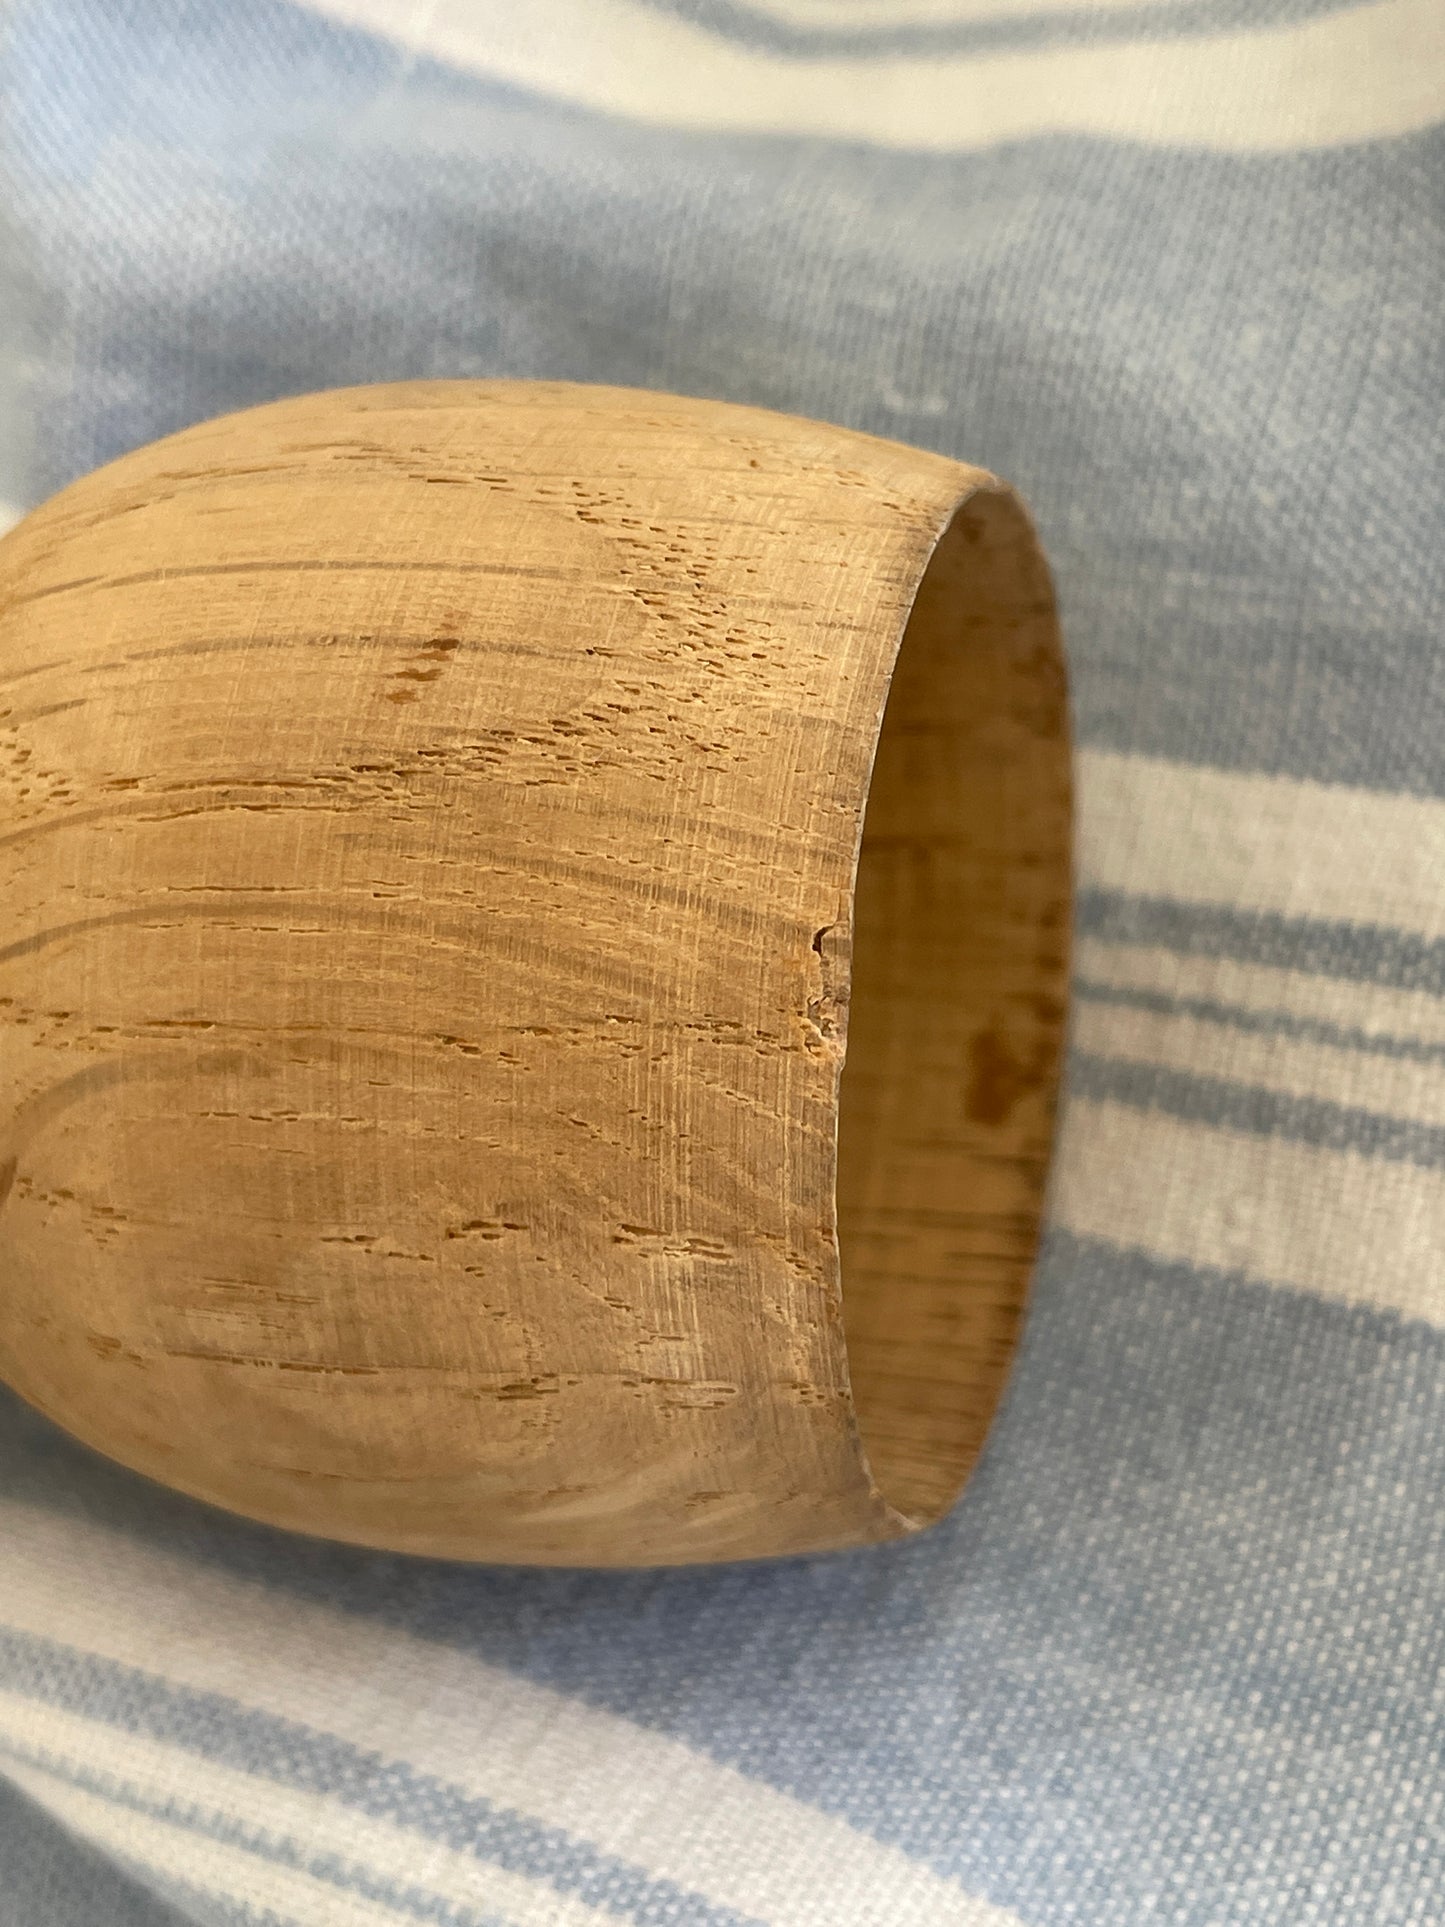 Wooden egg cups